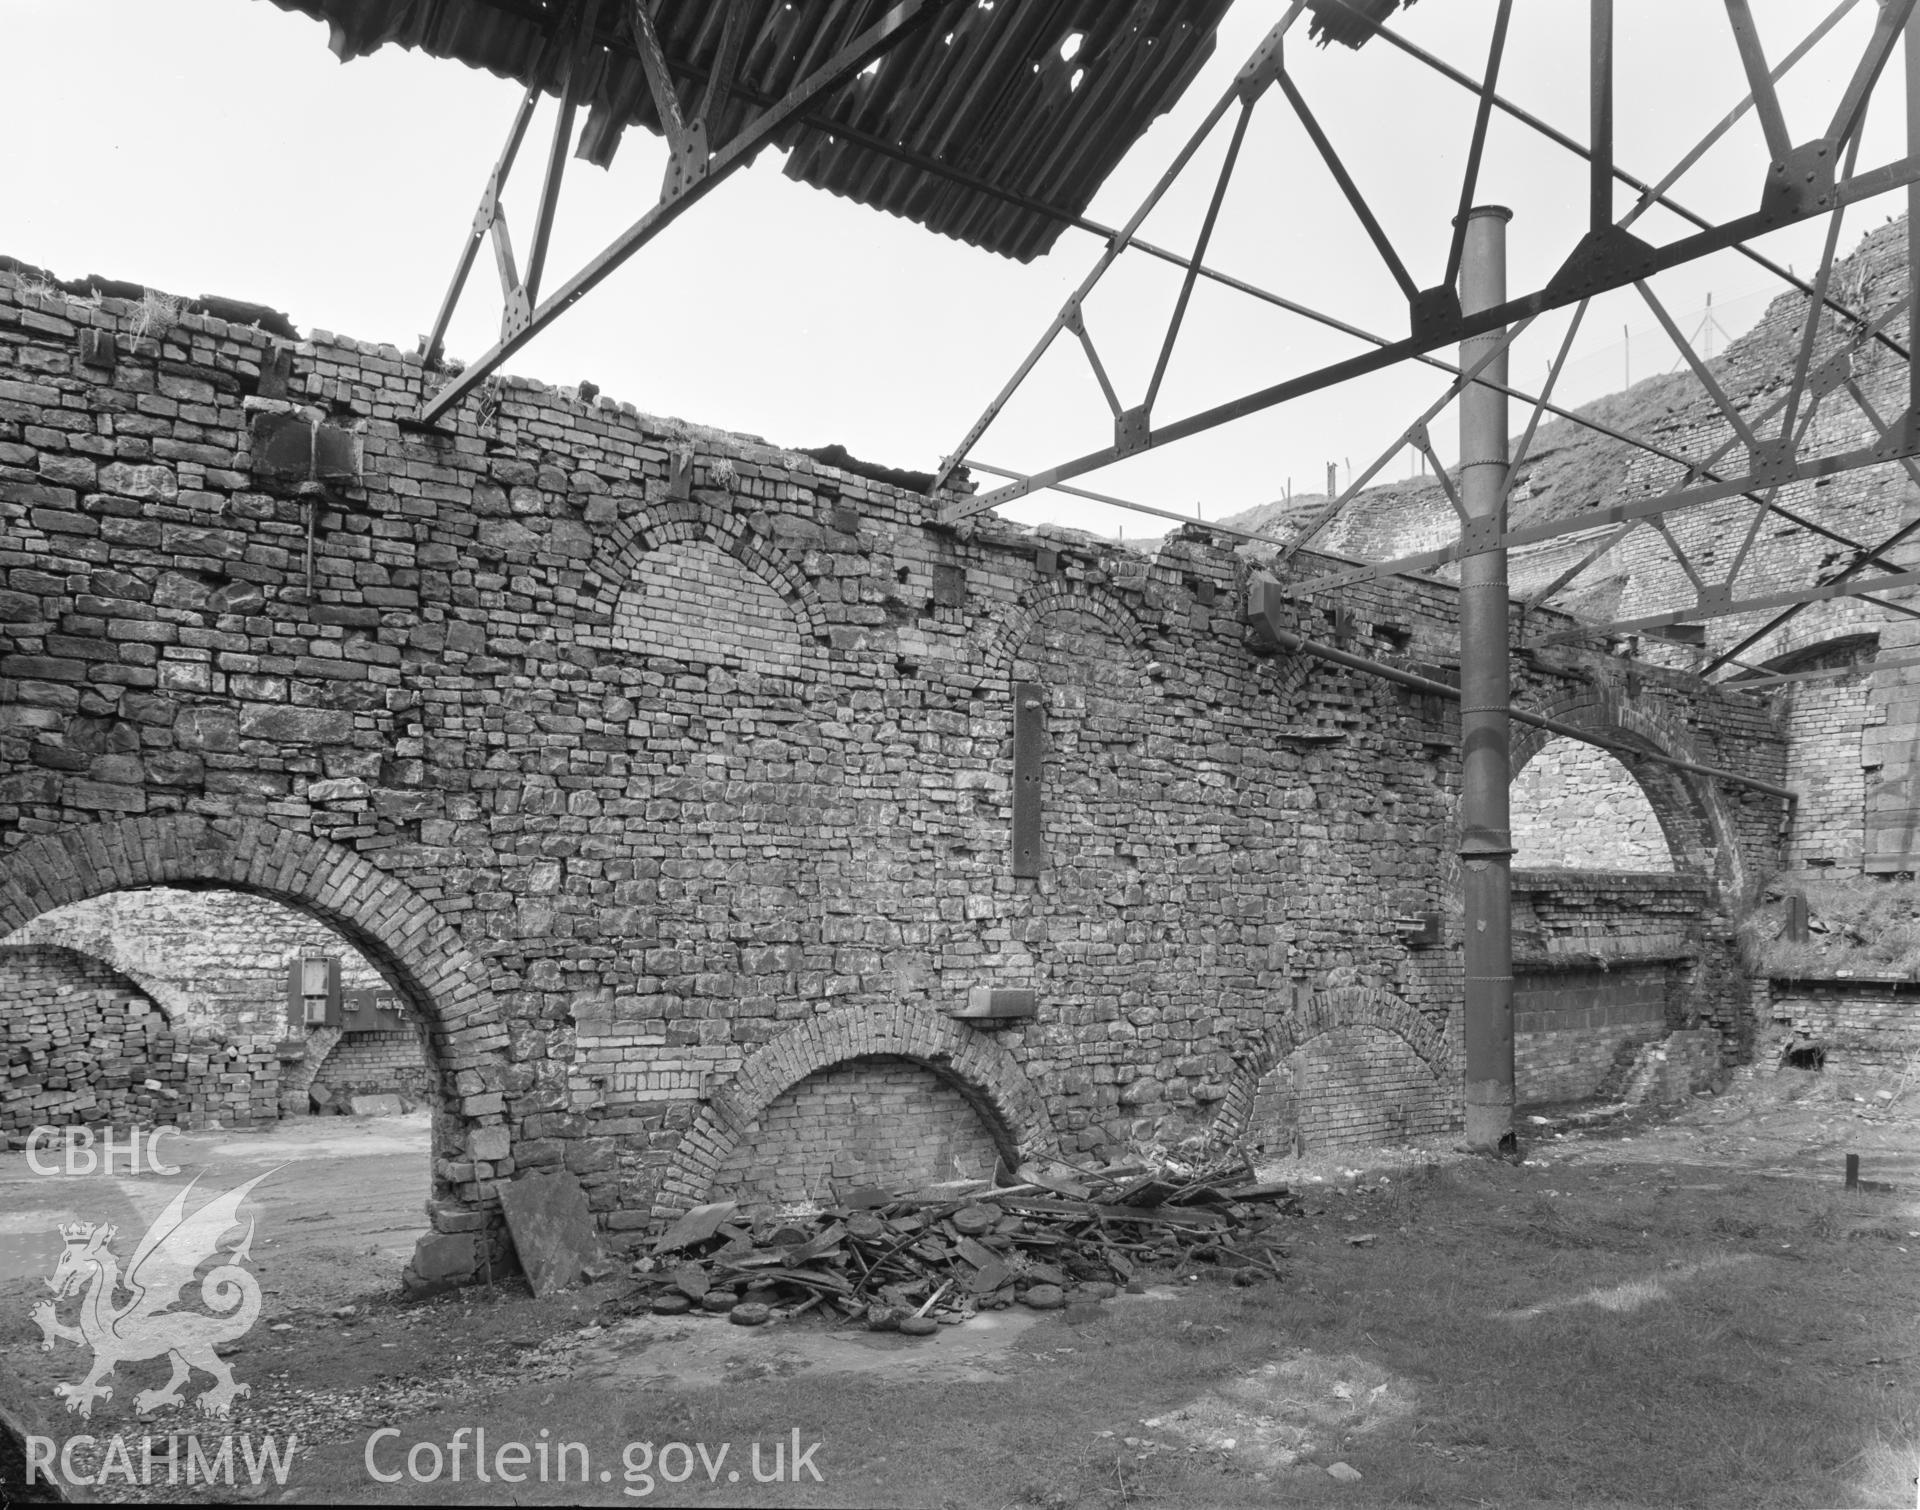 Digital copy of an acetate negative showing view of Blaenavon Ironworks taken by D.O.E. in 1977.